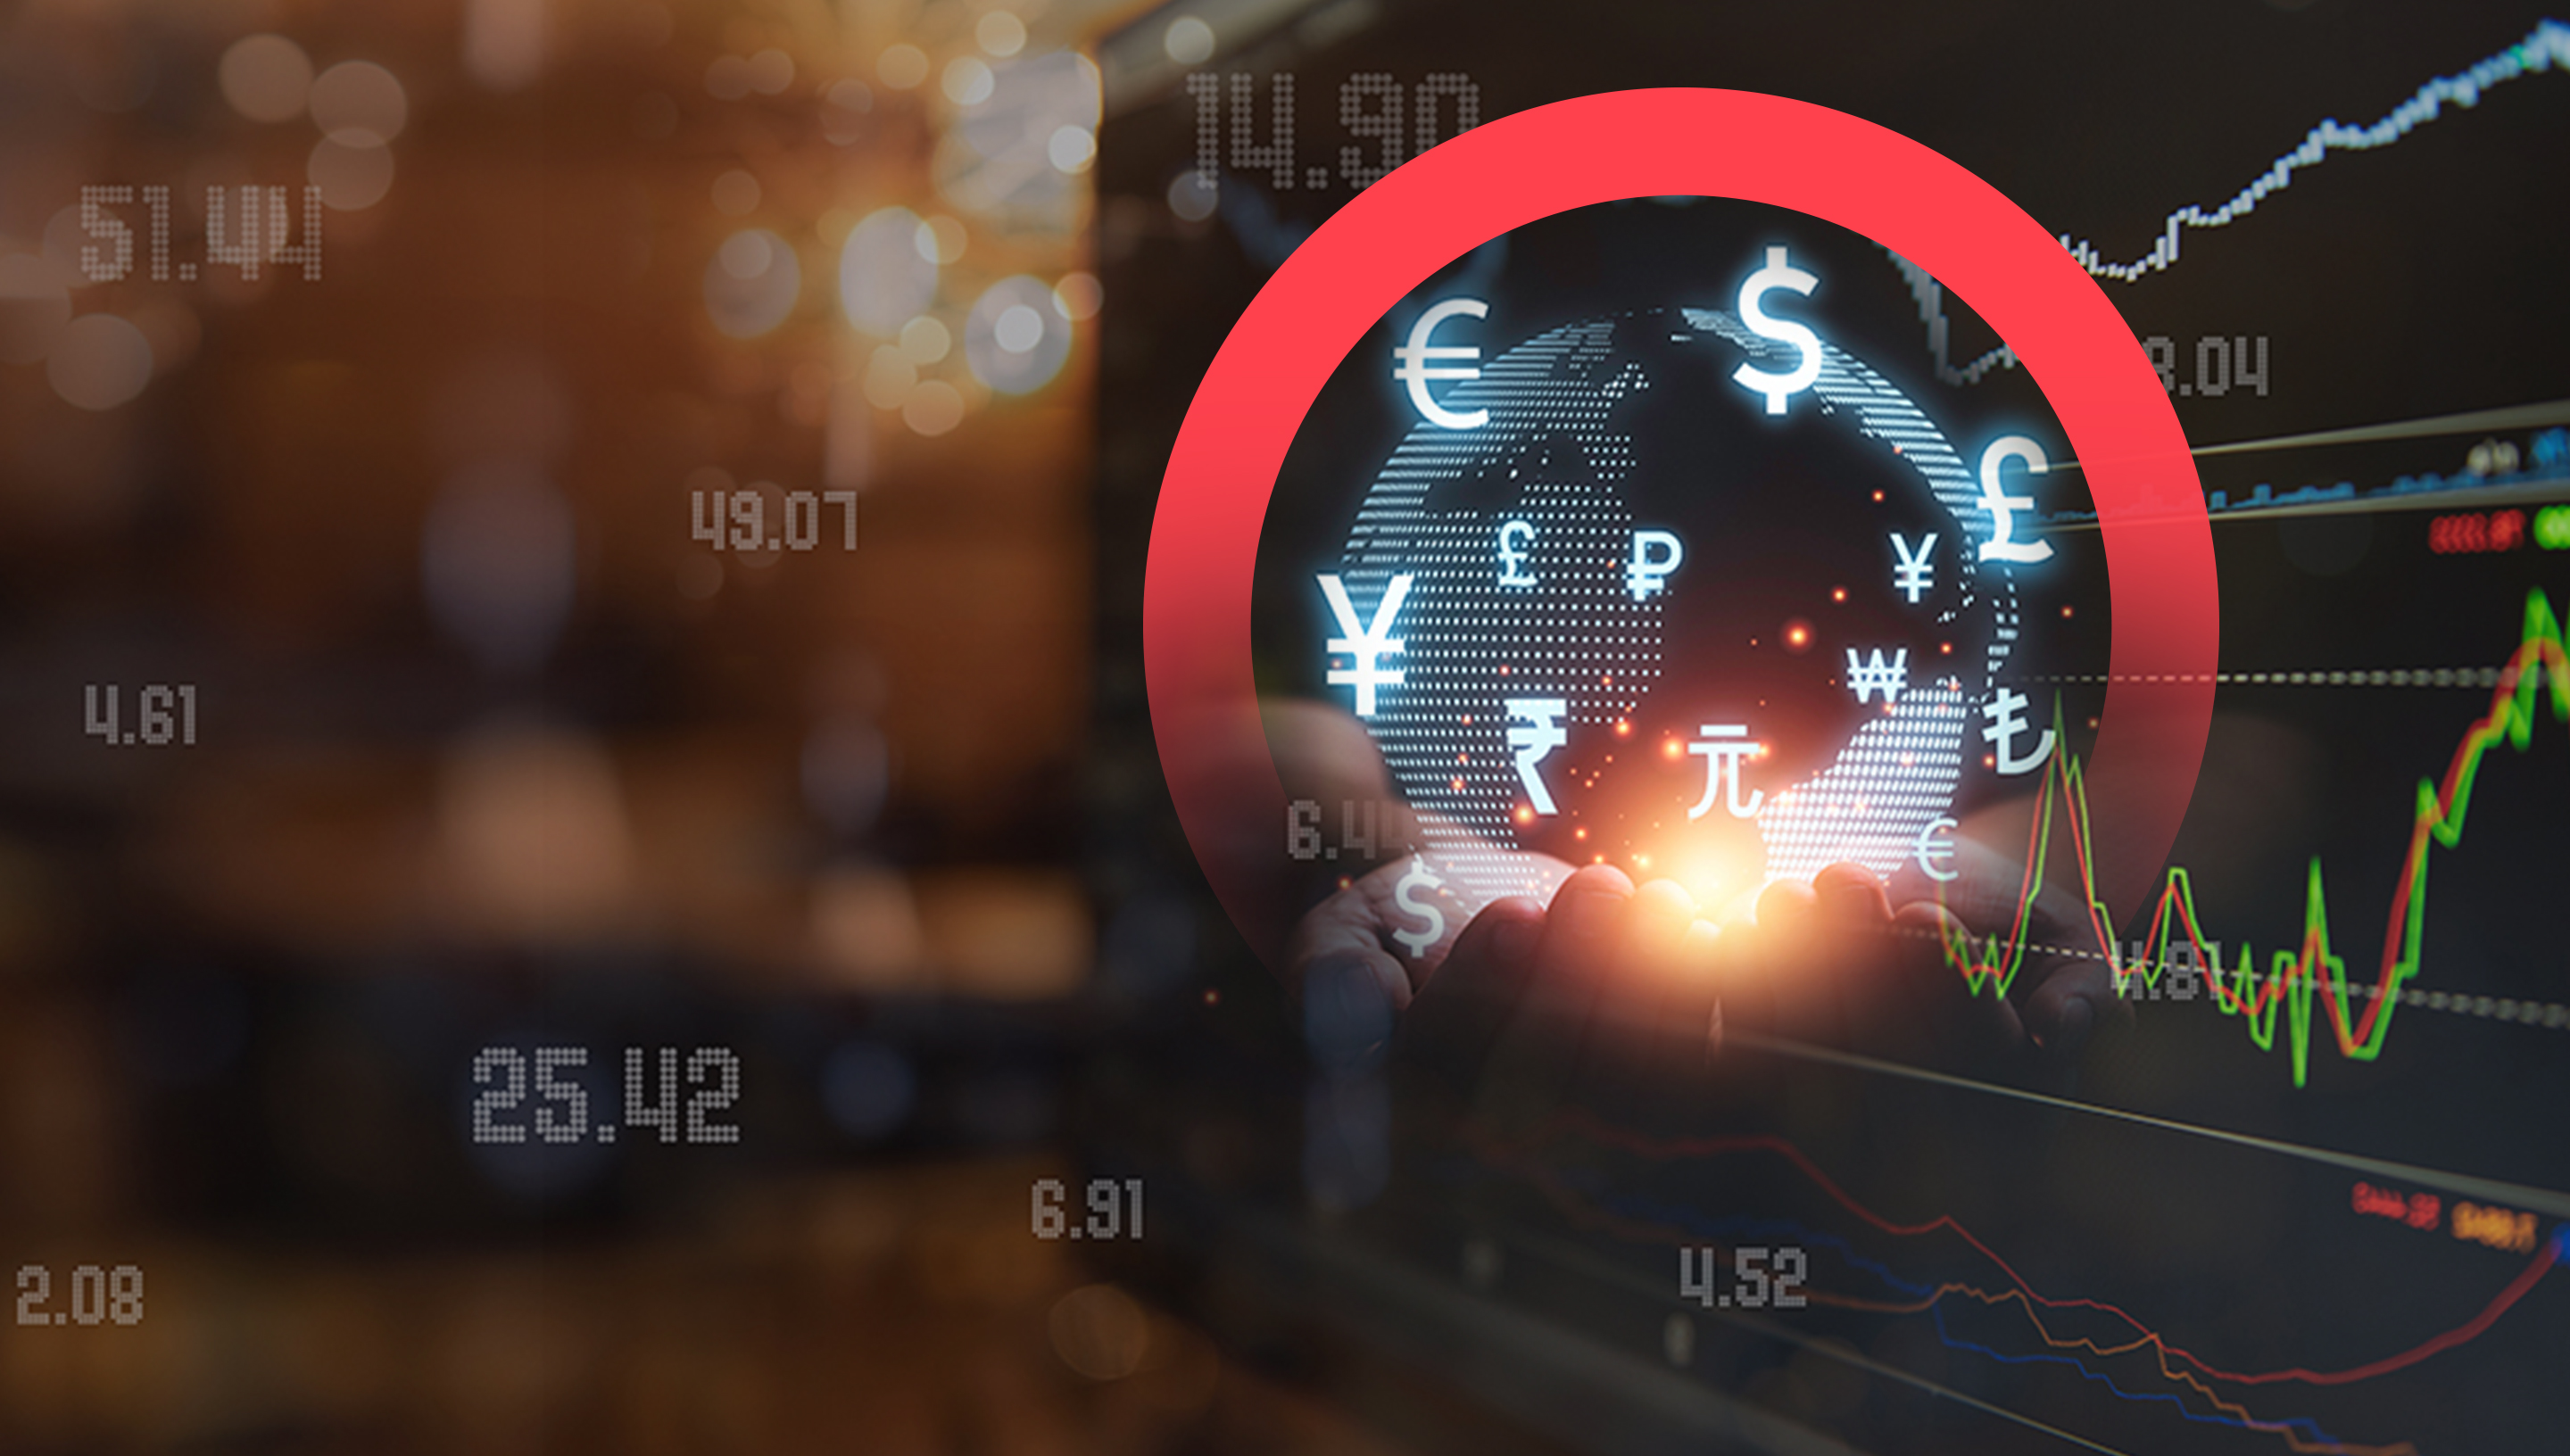 The future of global banking is visualized in a montage of stock ticker imagery, global currency symbols, and a digitized globe.